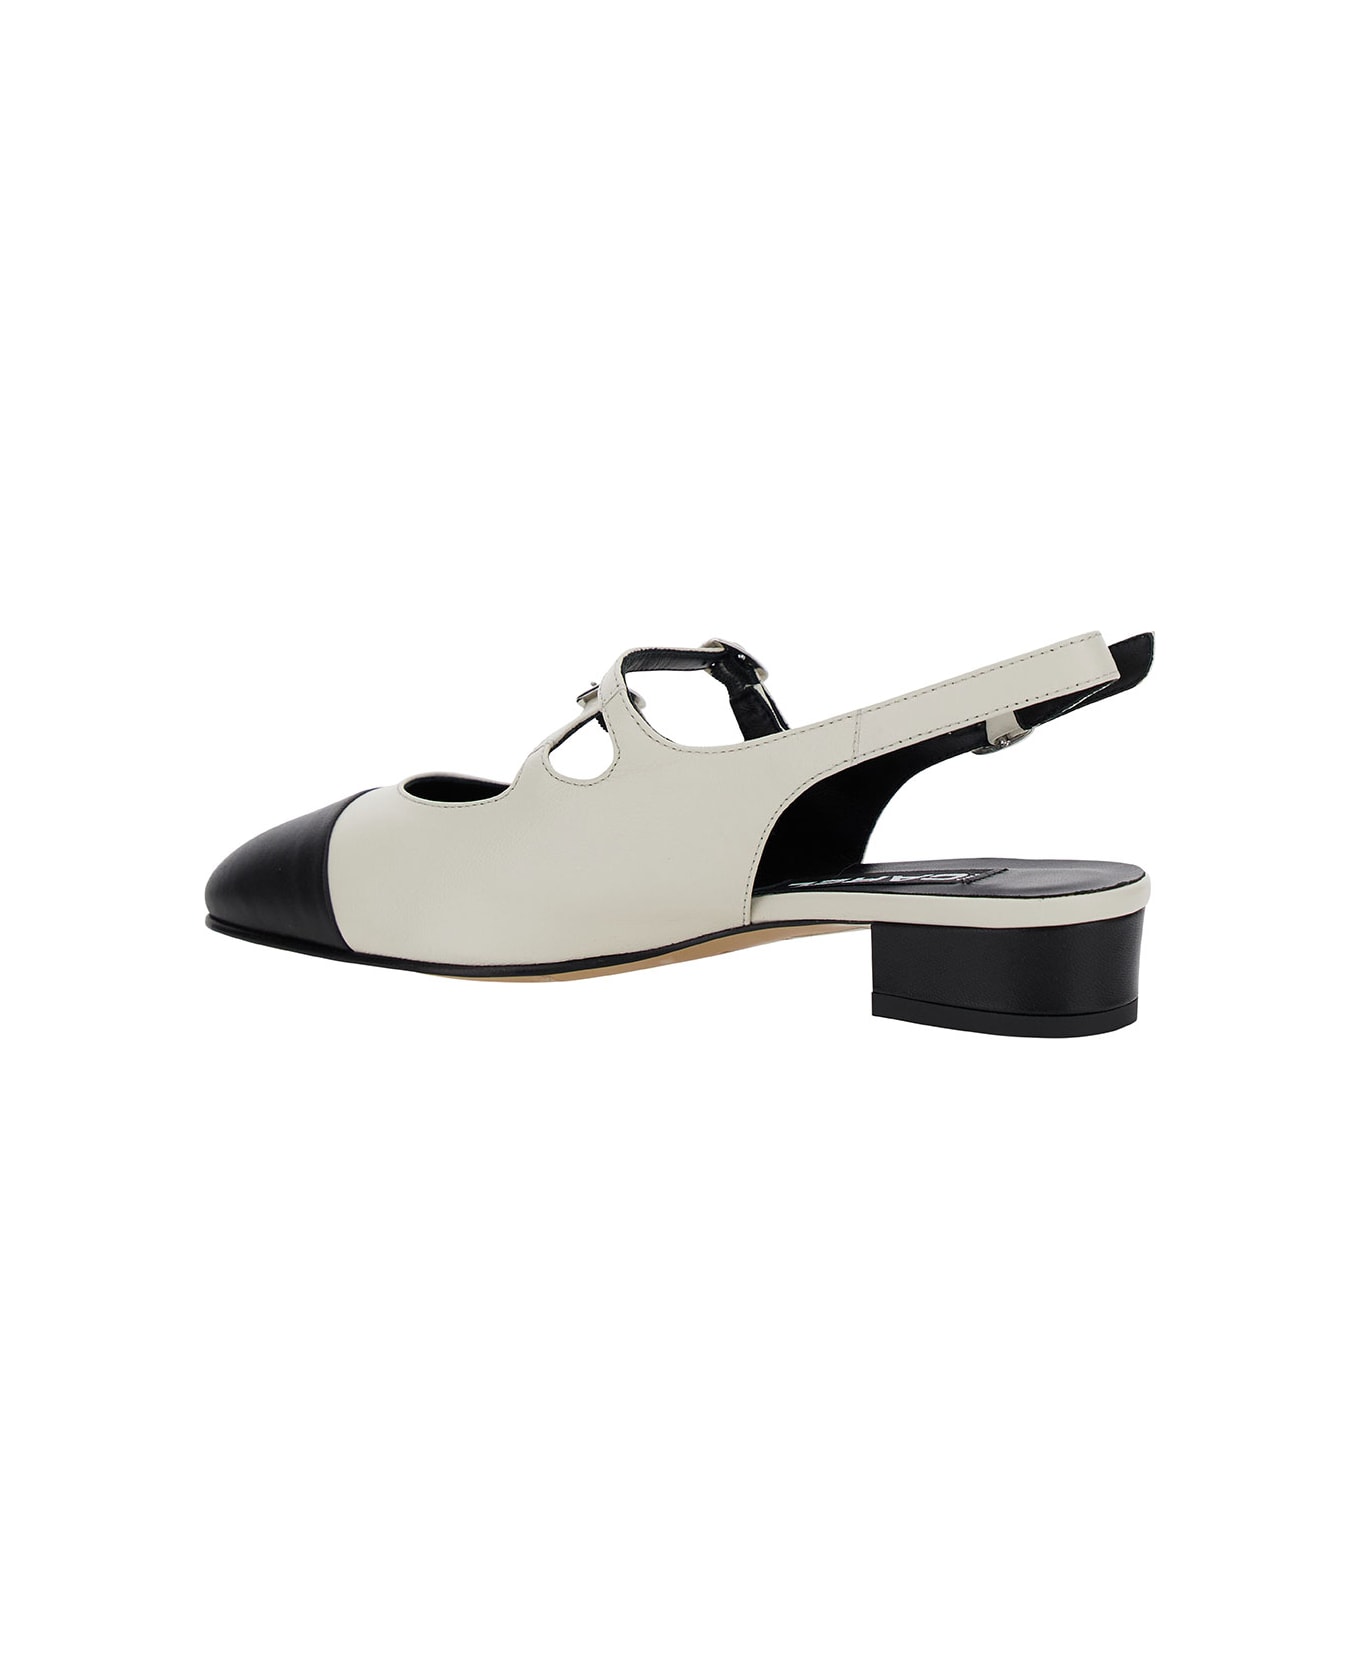 Carel 'abricot' White Slingback Mary Janes With Contrasting Toe In Leather Woman - Beige